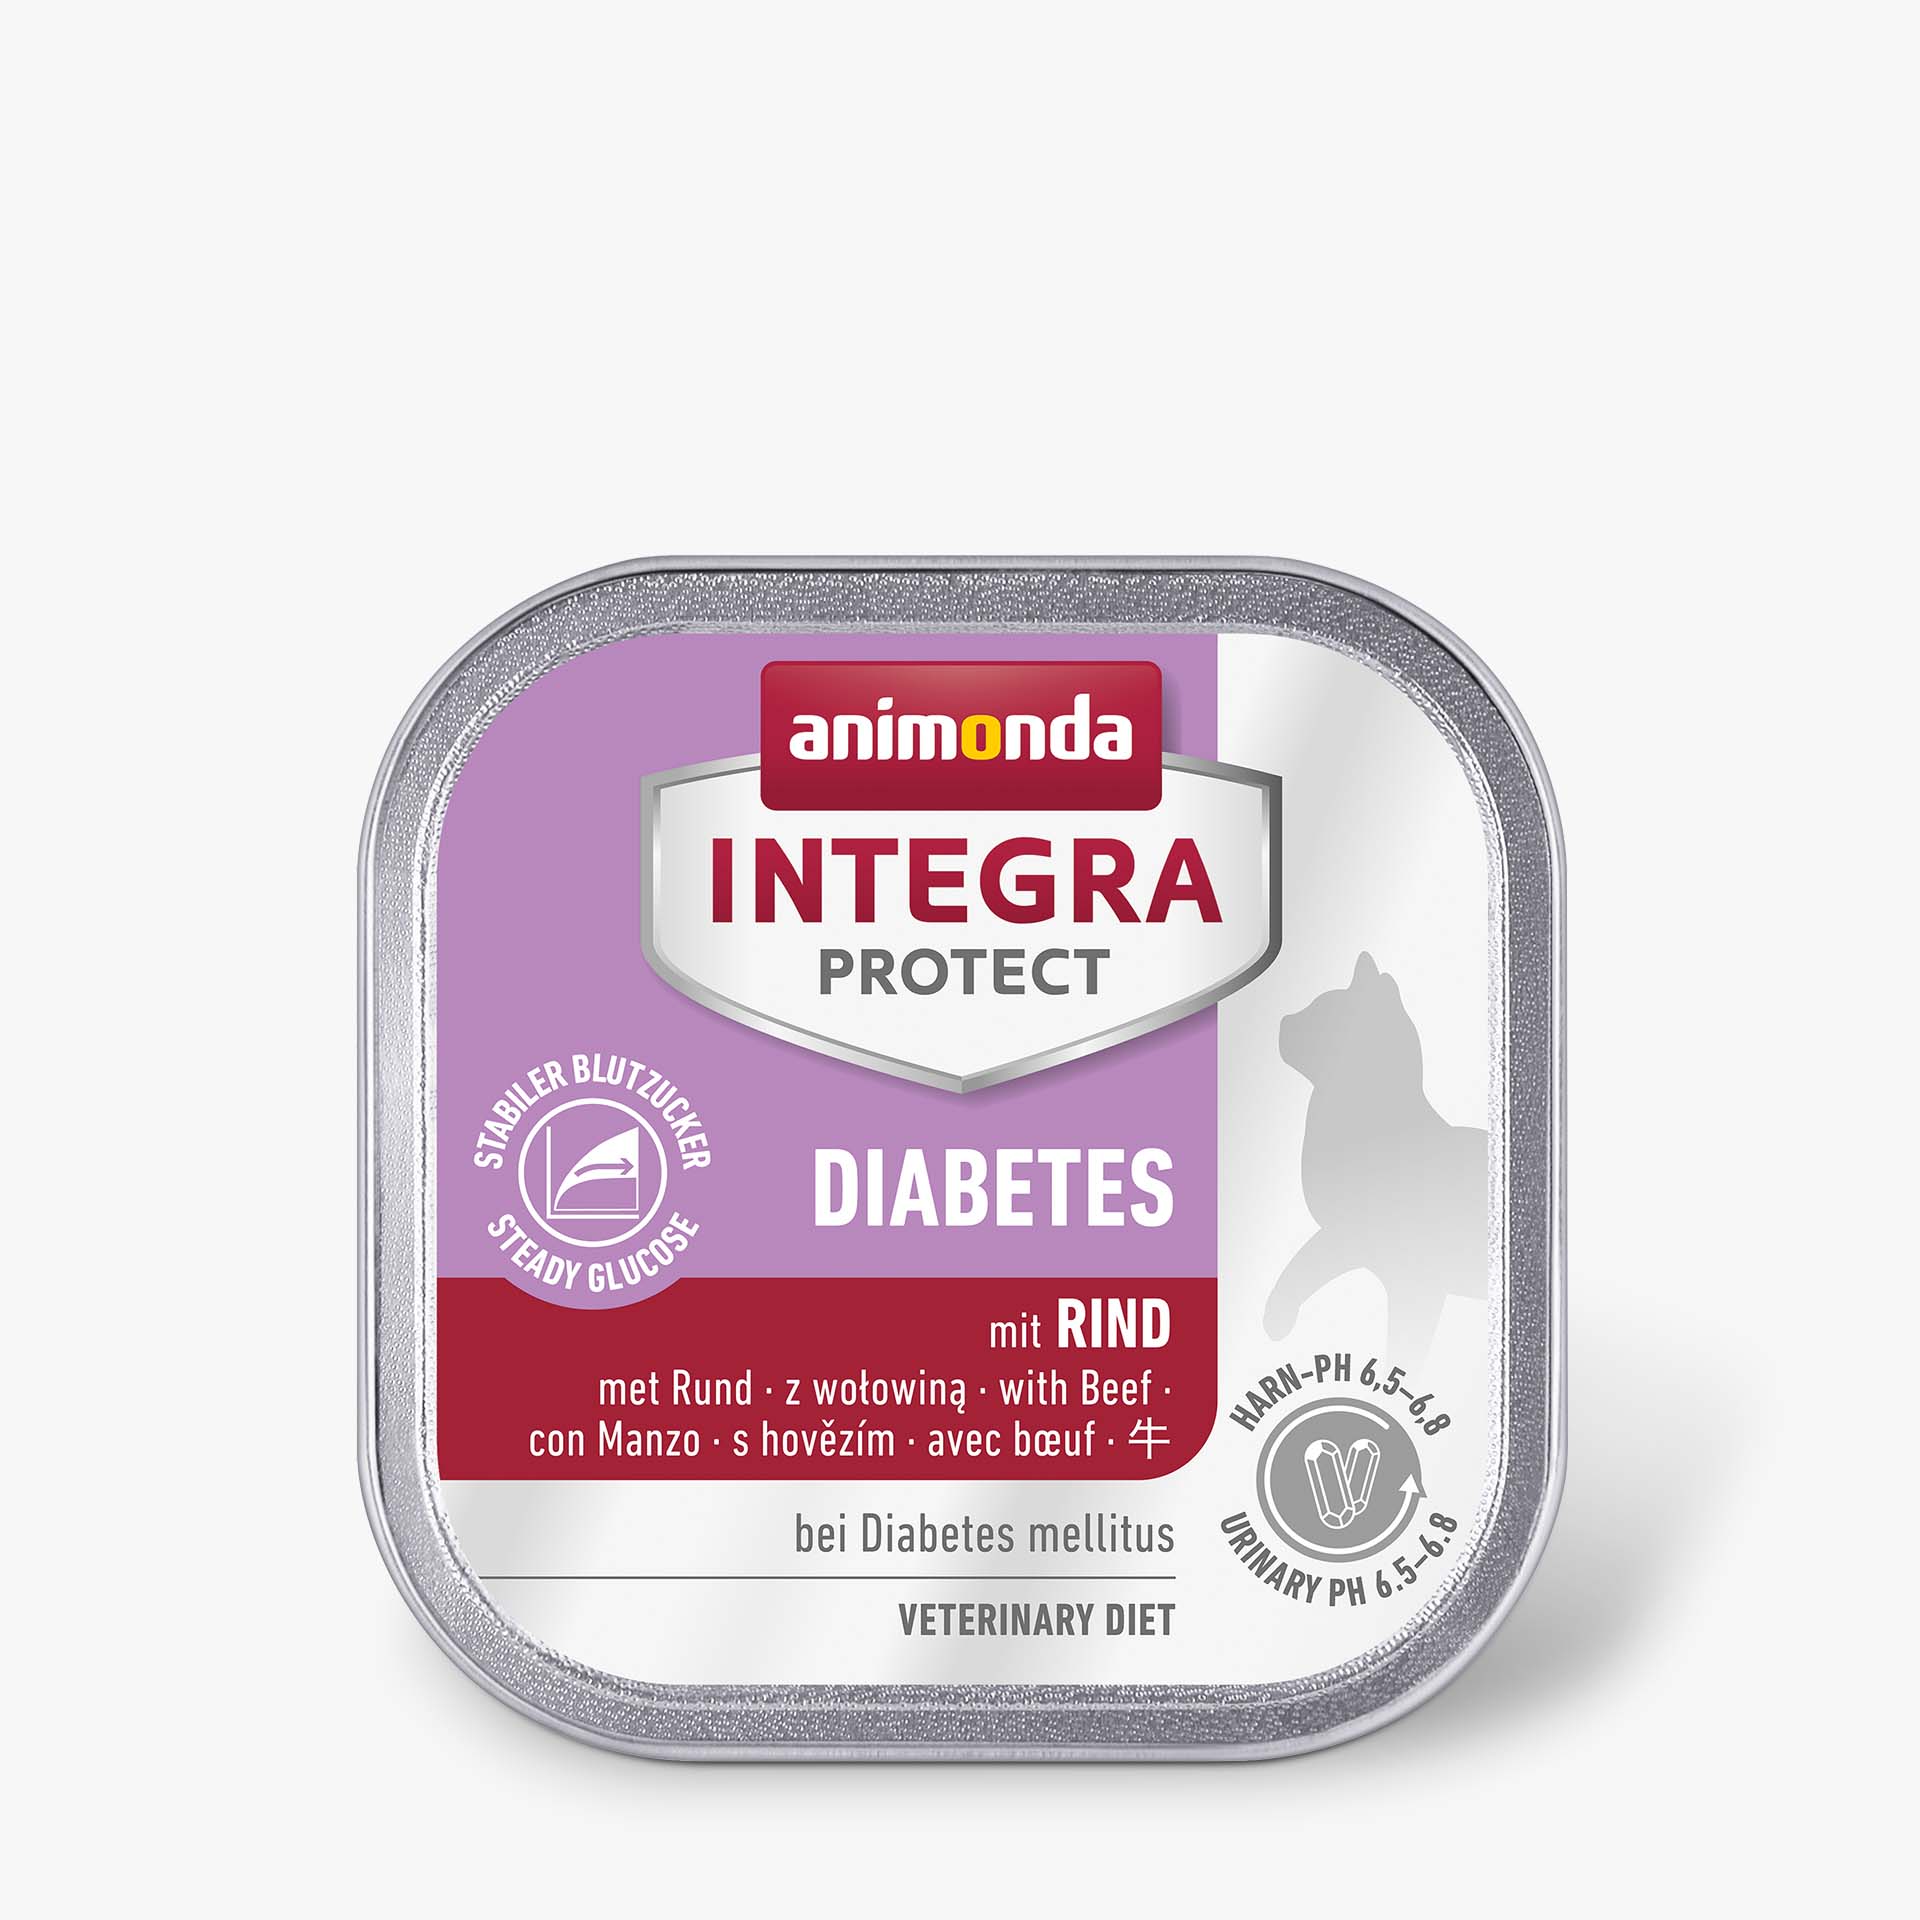 INTEGRA PROTECT with Beef Diabetes